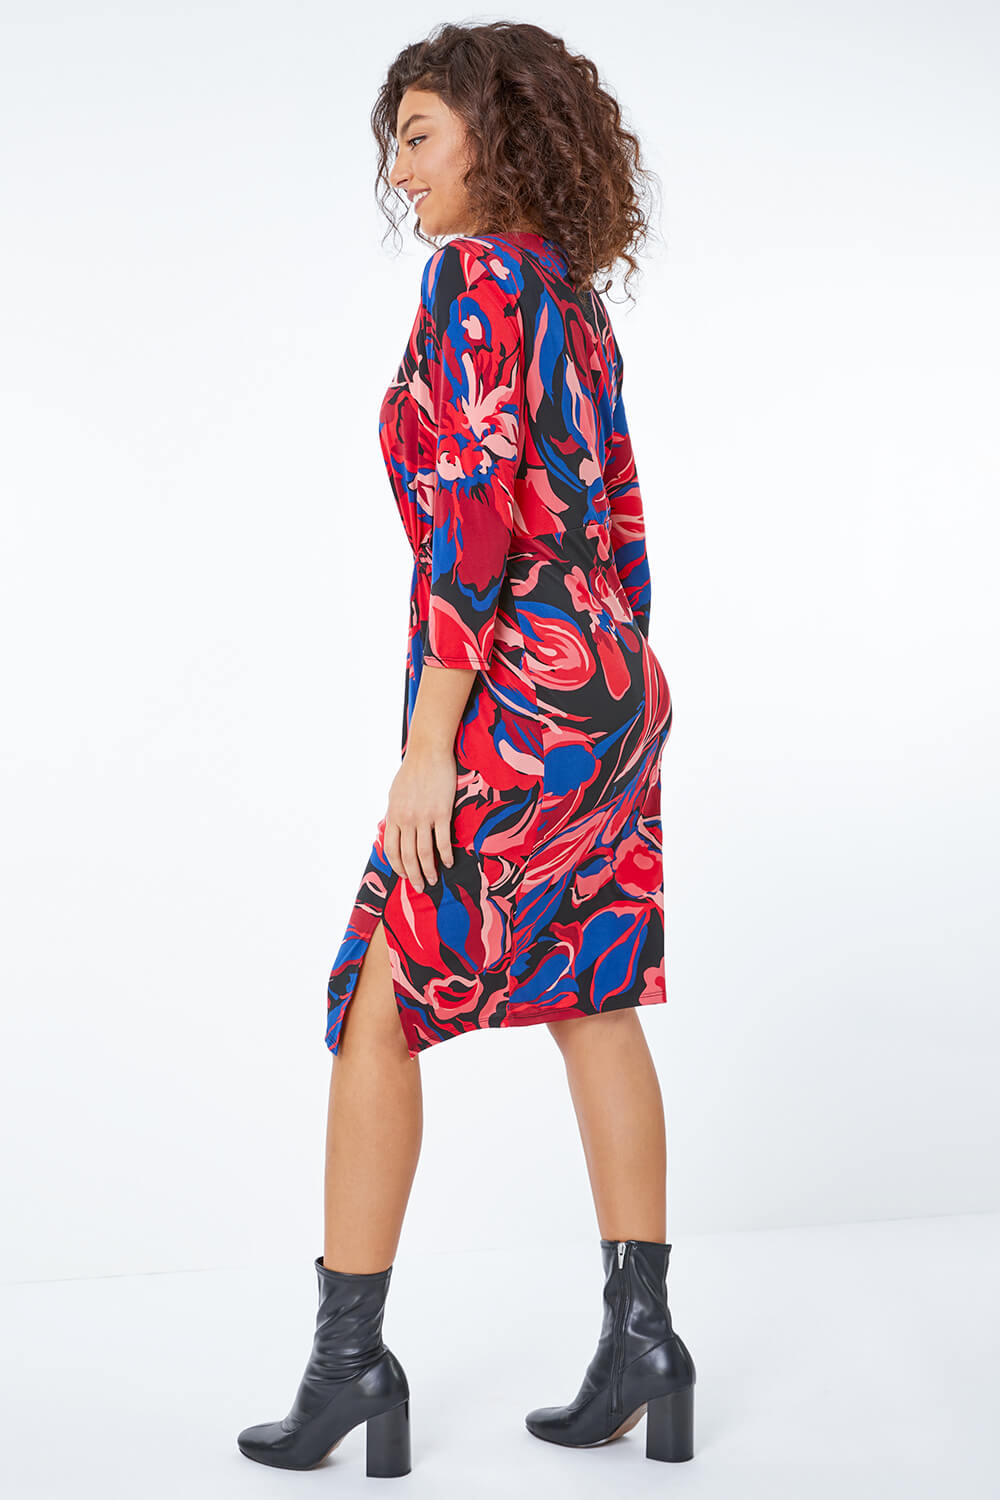 CORAL Petite Abstract Floral Side Knot Dress, Image 3 of 5